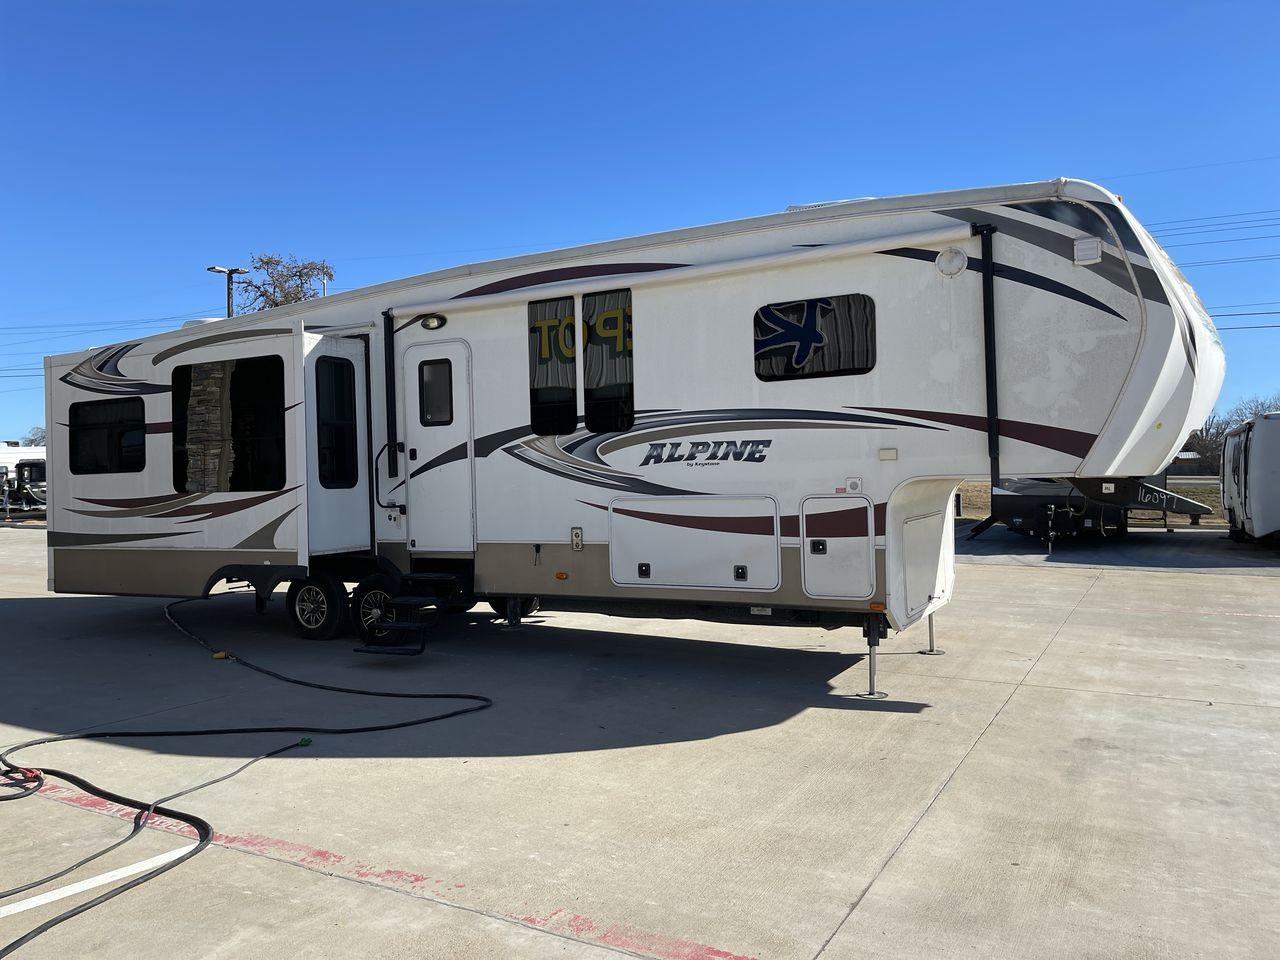 2014 WHITE ALPINE 3500RE - (4YDF35025EE) , Length: 39.17 ft. | Dry Weight: 12,379 lbs. | Gross Weight: 15,500 lbs. | Slides: 4 transmission, located at 4319 N Main St, Cleburne, TX, 76033, (817) 678-5133, 32.385960, -97.391212 - The 2014 Alpine 3500RE fifth wheel combines style and utility. For individuals looking for a luxurious home on wheels, this RV's amenities are precisely crafted and comfort-oriented. The dimensions of this unit are 39.17 ft in length, 8 ft in width, and 12.67 ft in height. It has a dry weight of 12, - Photo #23